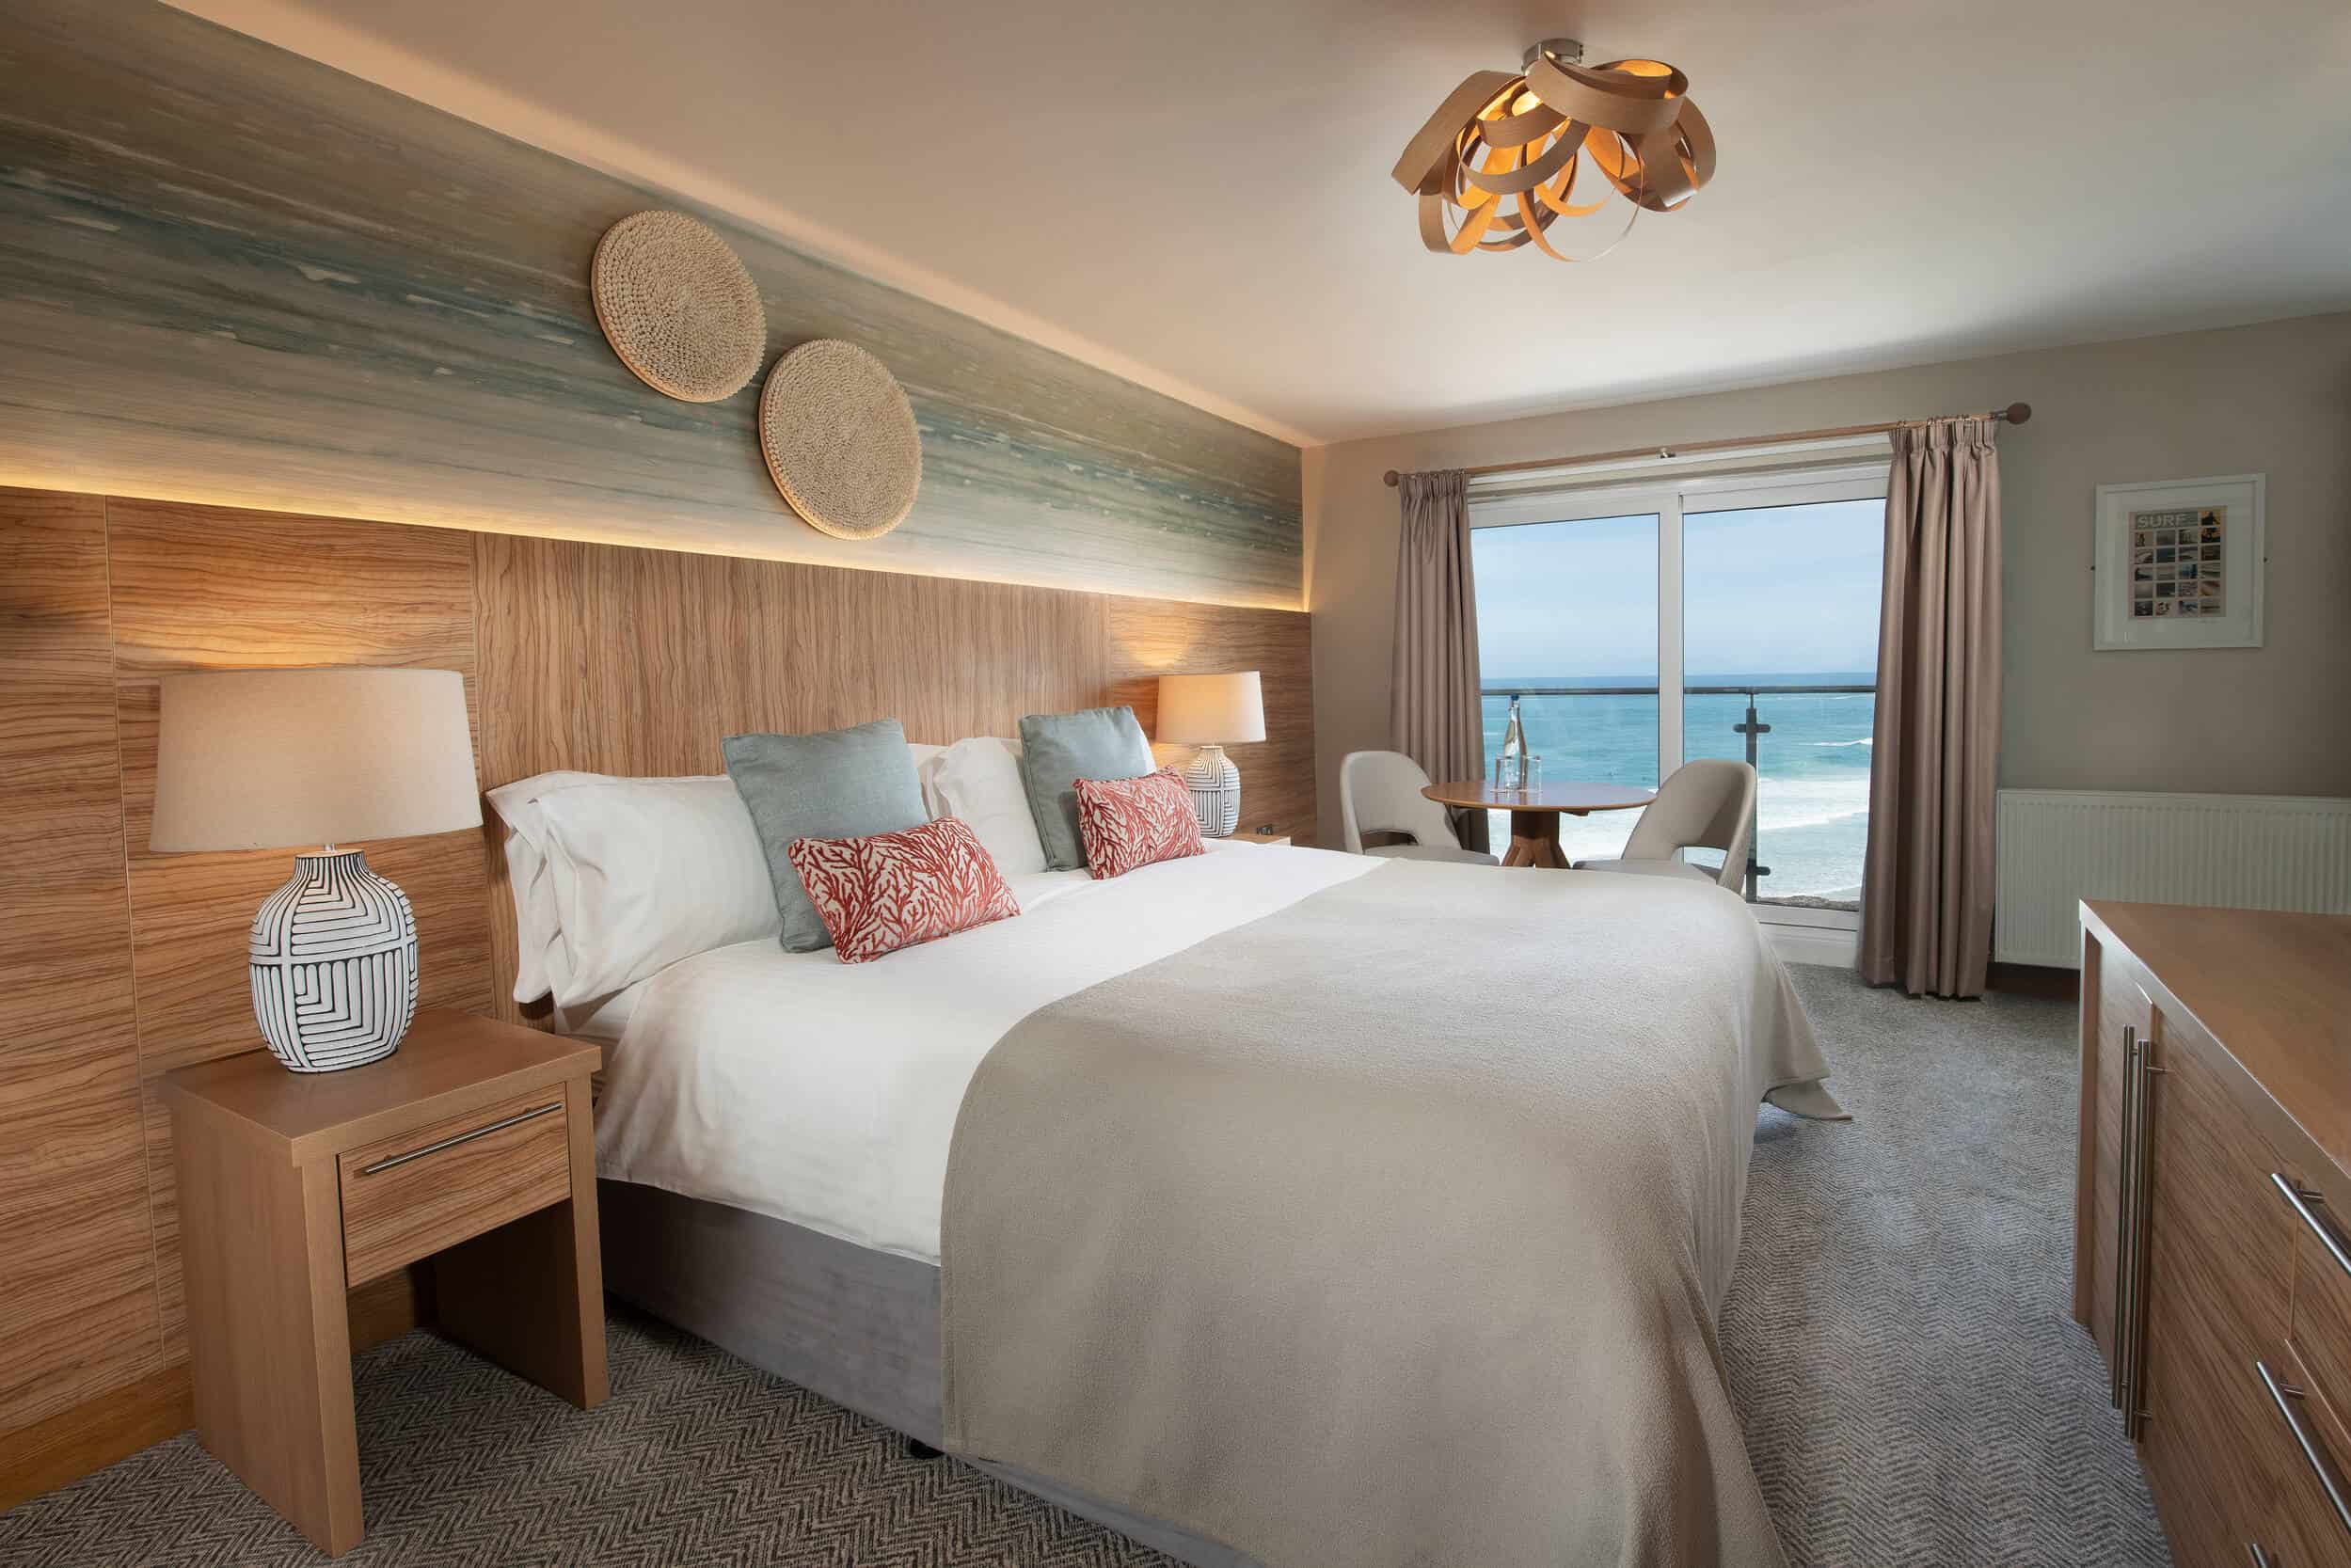 Hotel of the month: Fistral Beach Hotel and Spa